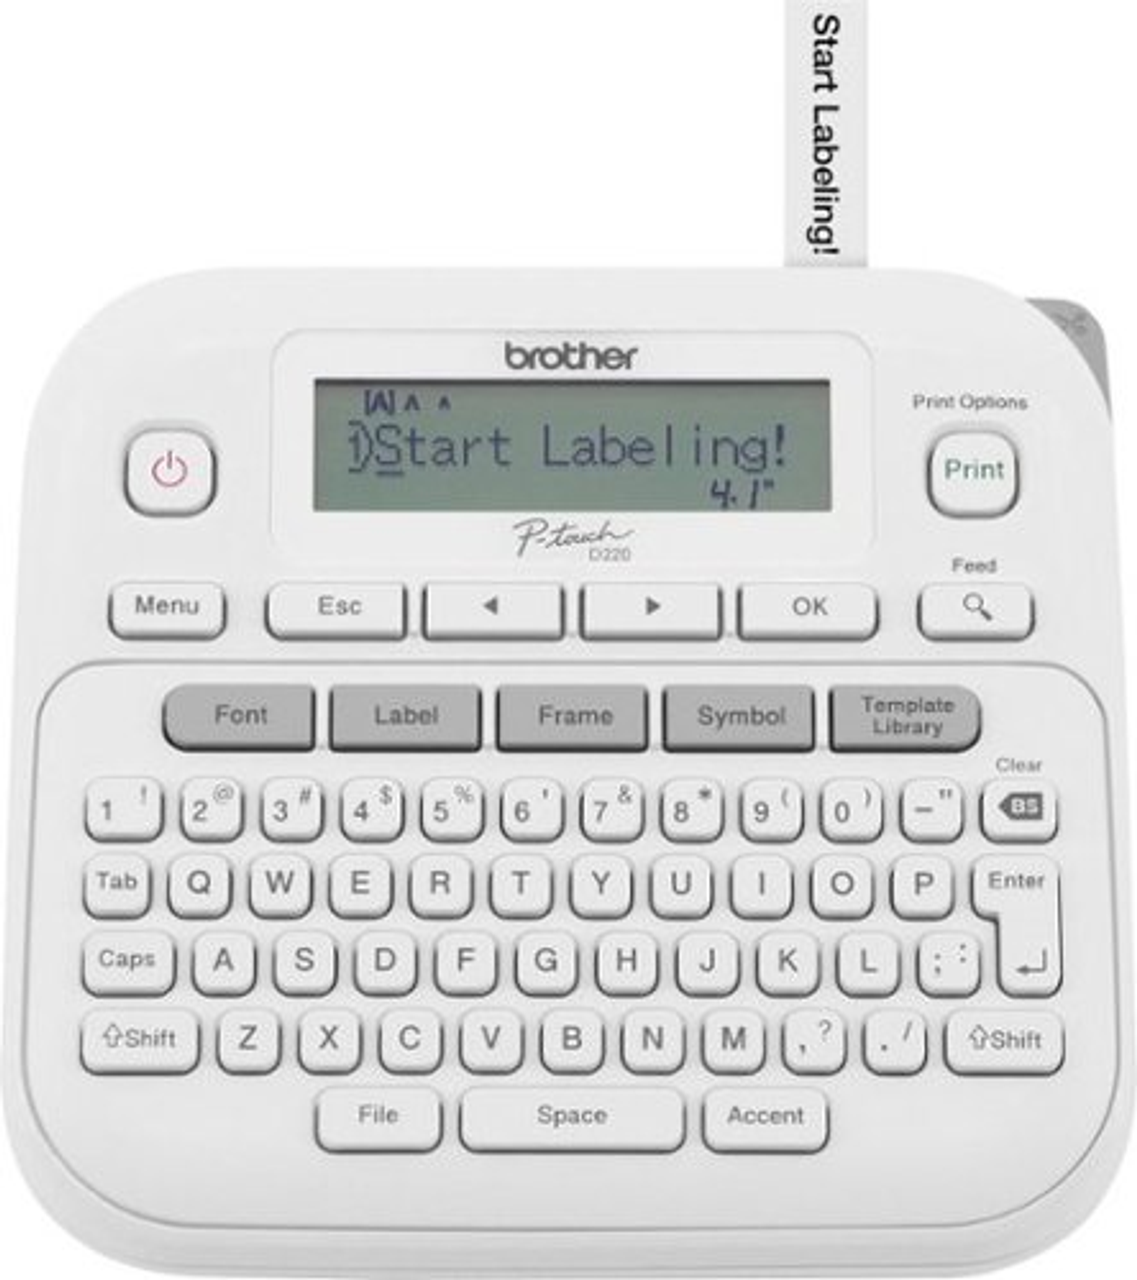 Brother - P-touch PTD220 Label Maker - White